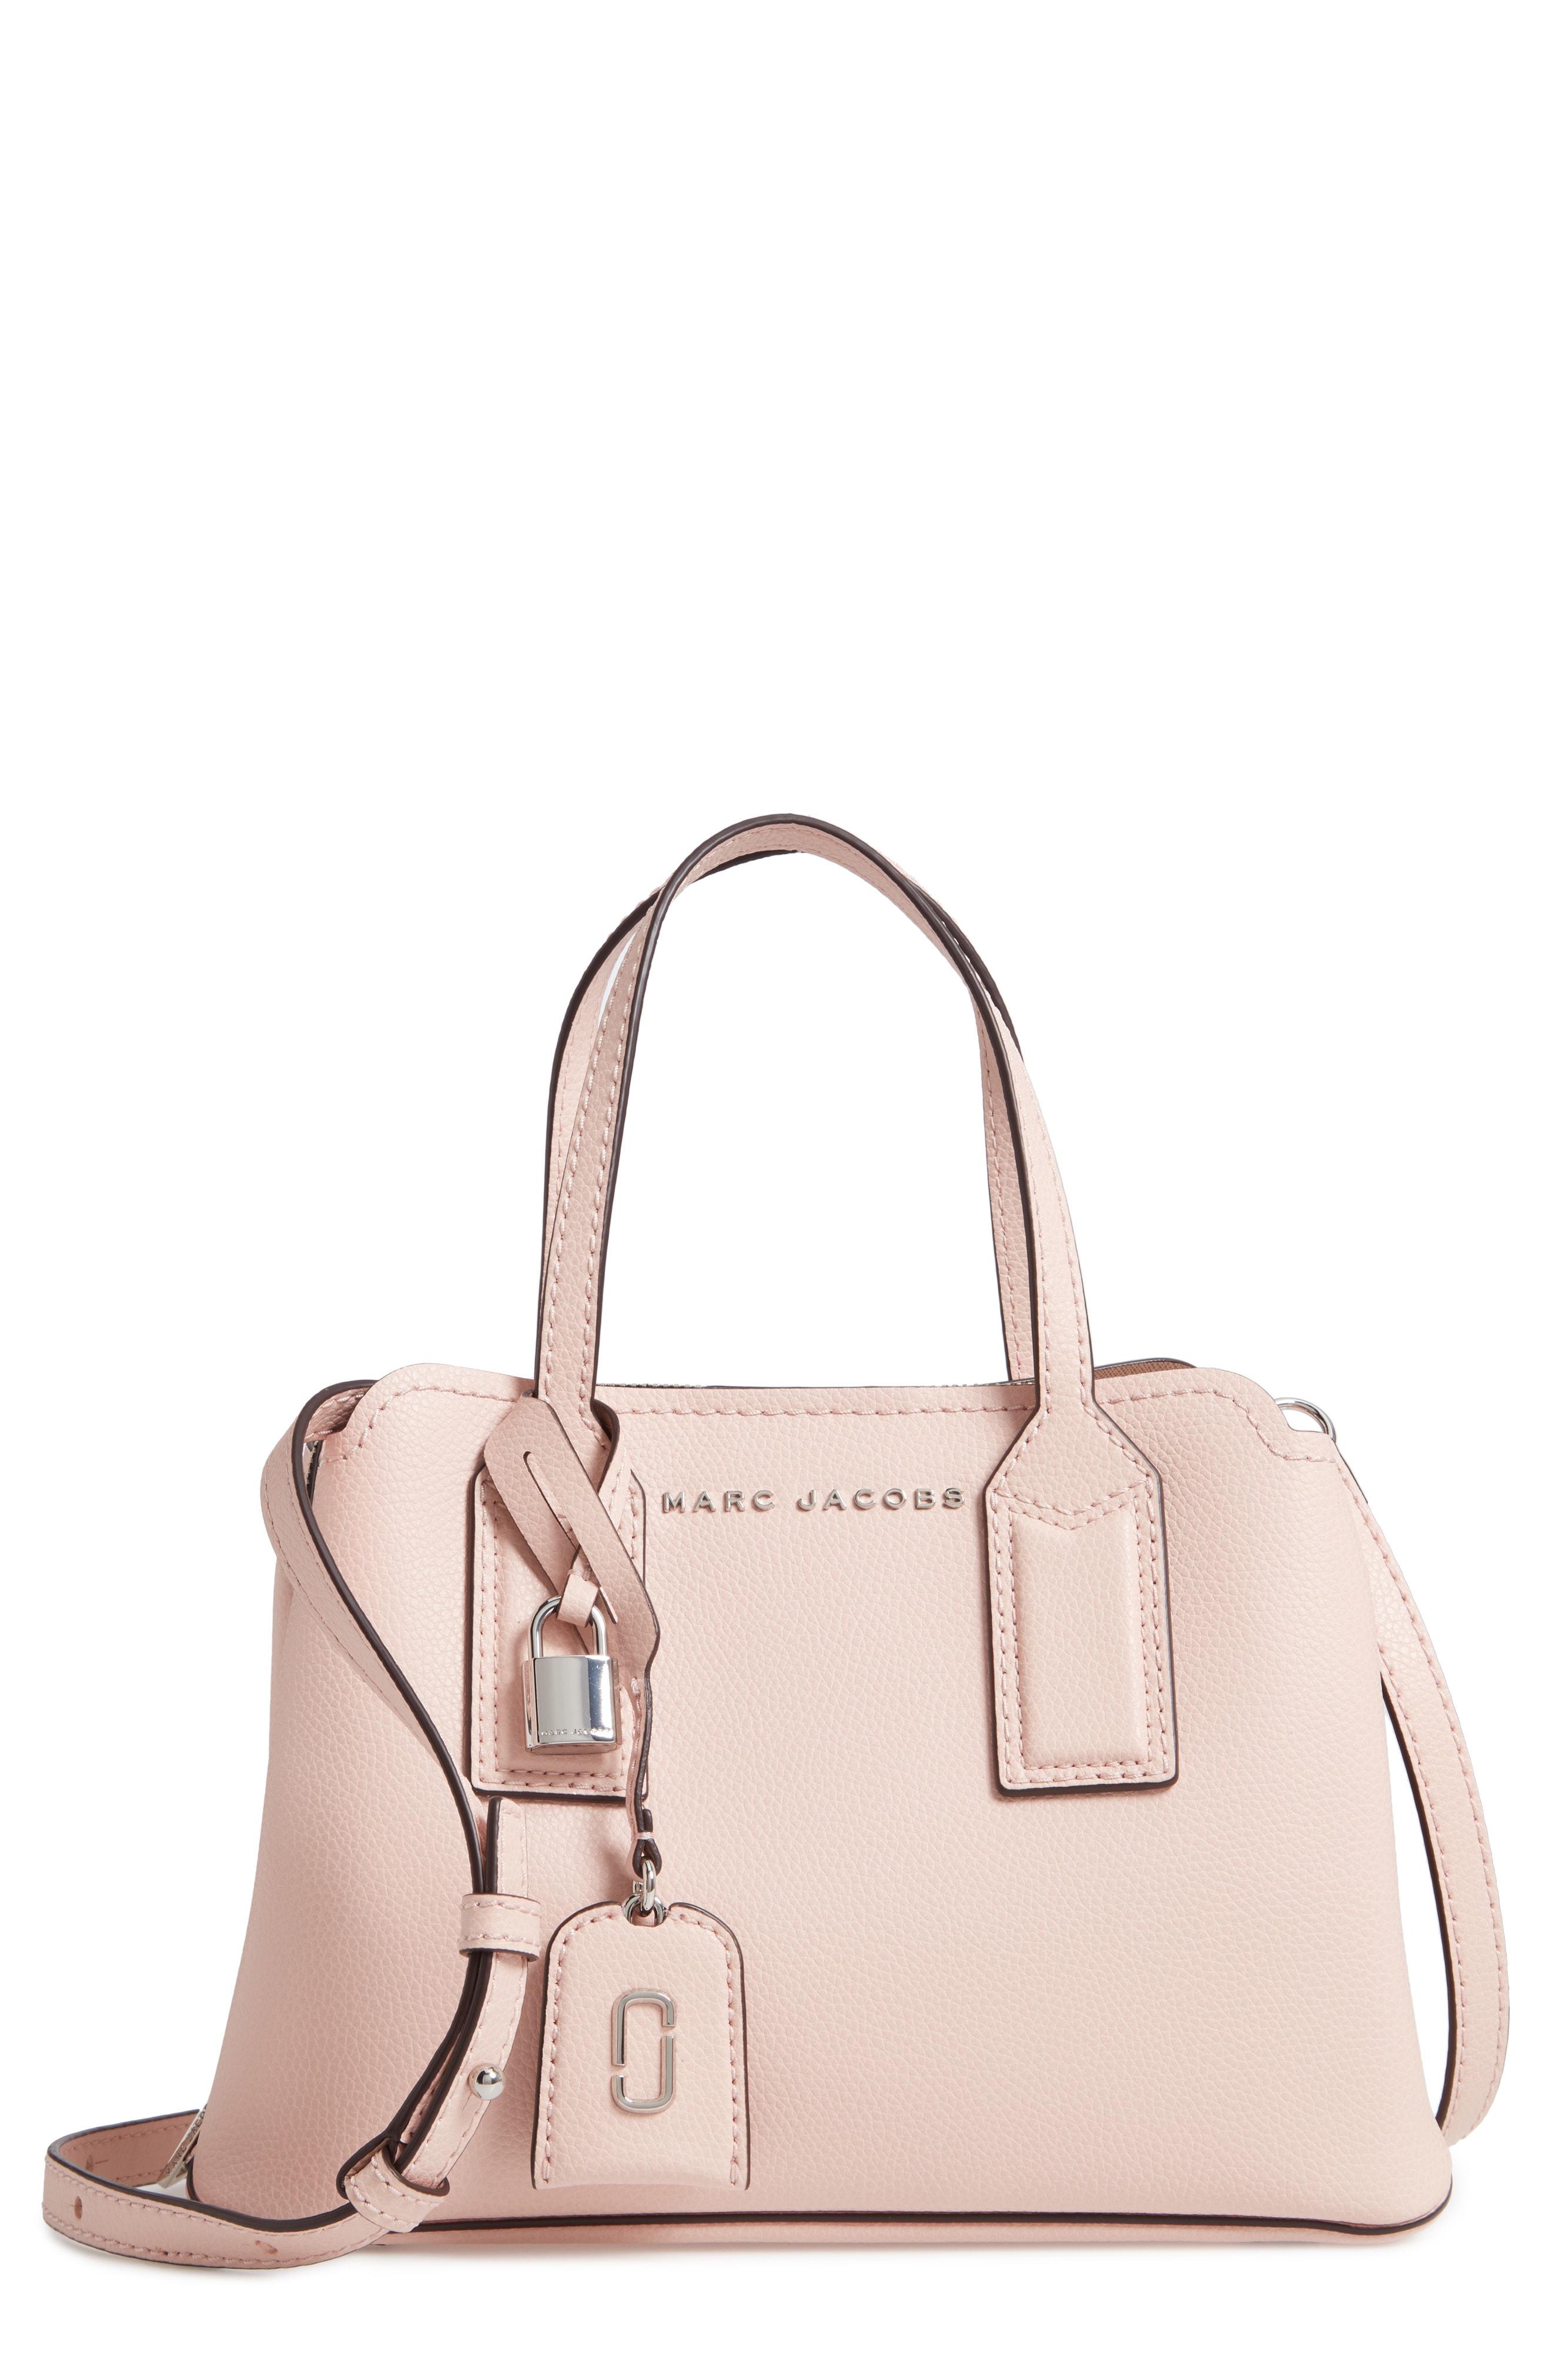 Lyst - Marc Jacobs The Editor 29 Leather Crossbody Bag in Pink